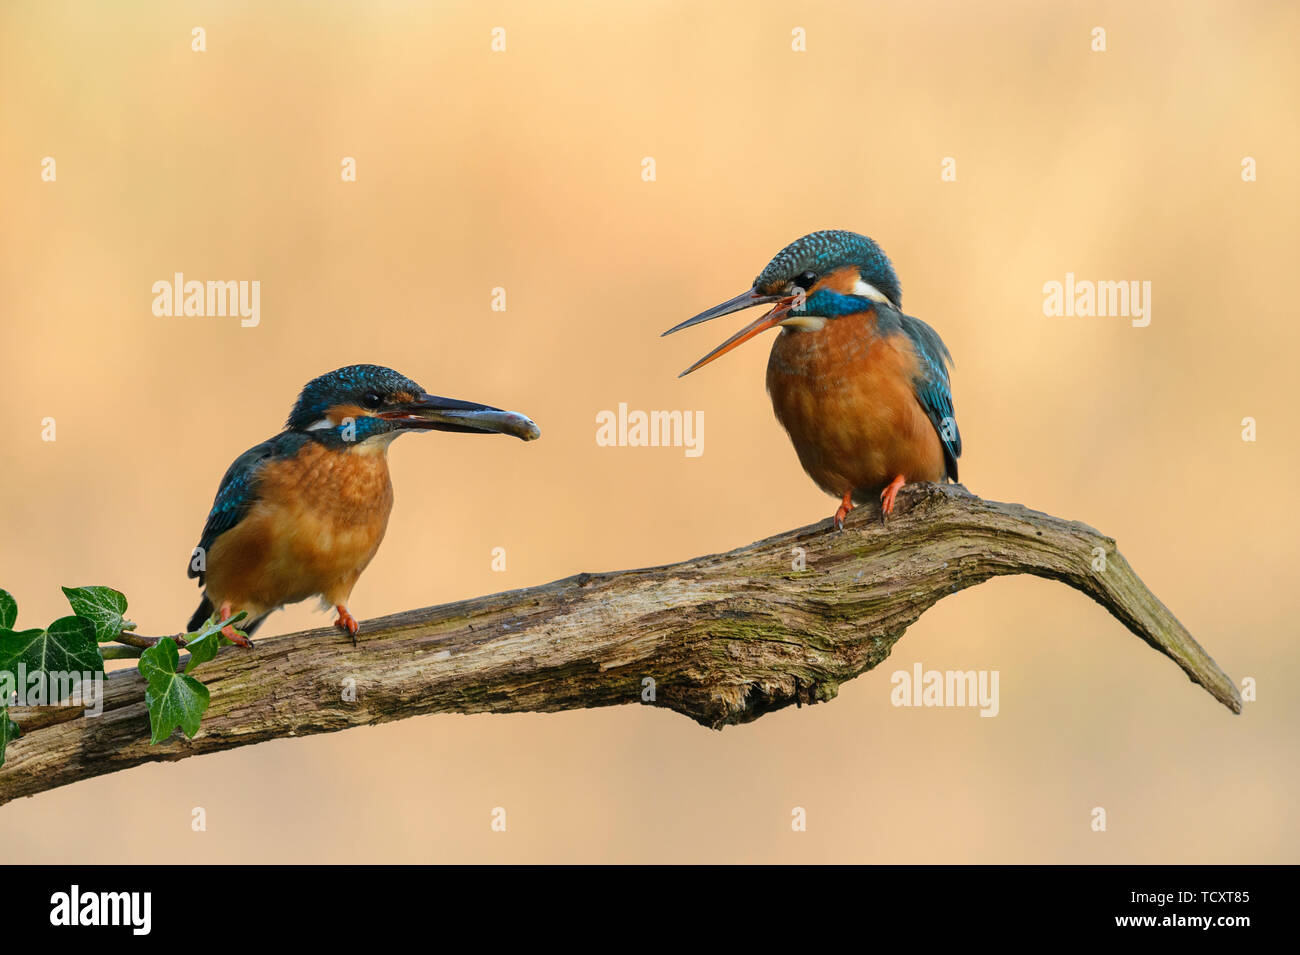 Pair of Kingfishers in courtship season with the male passing a fish to the female Stock Photo